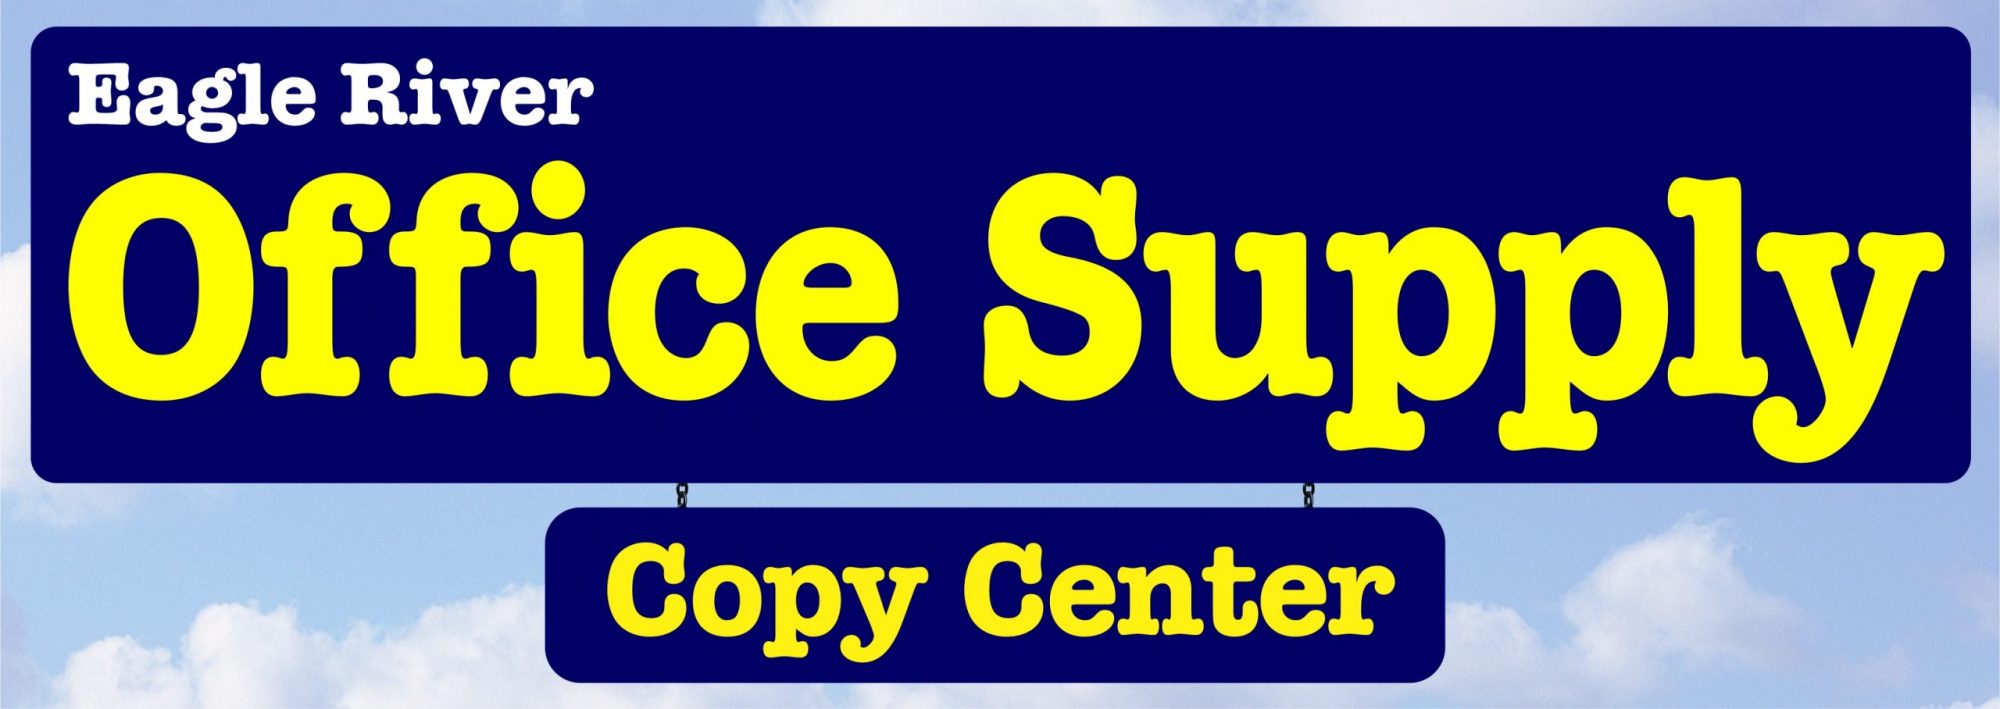 Eagle River Office Supply and Copy Center